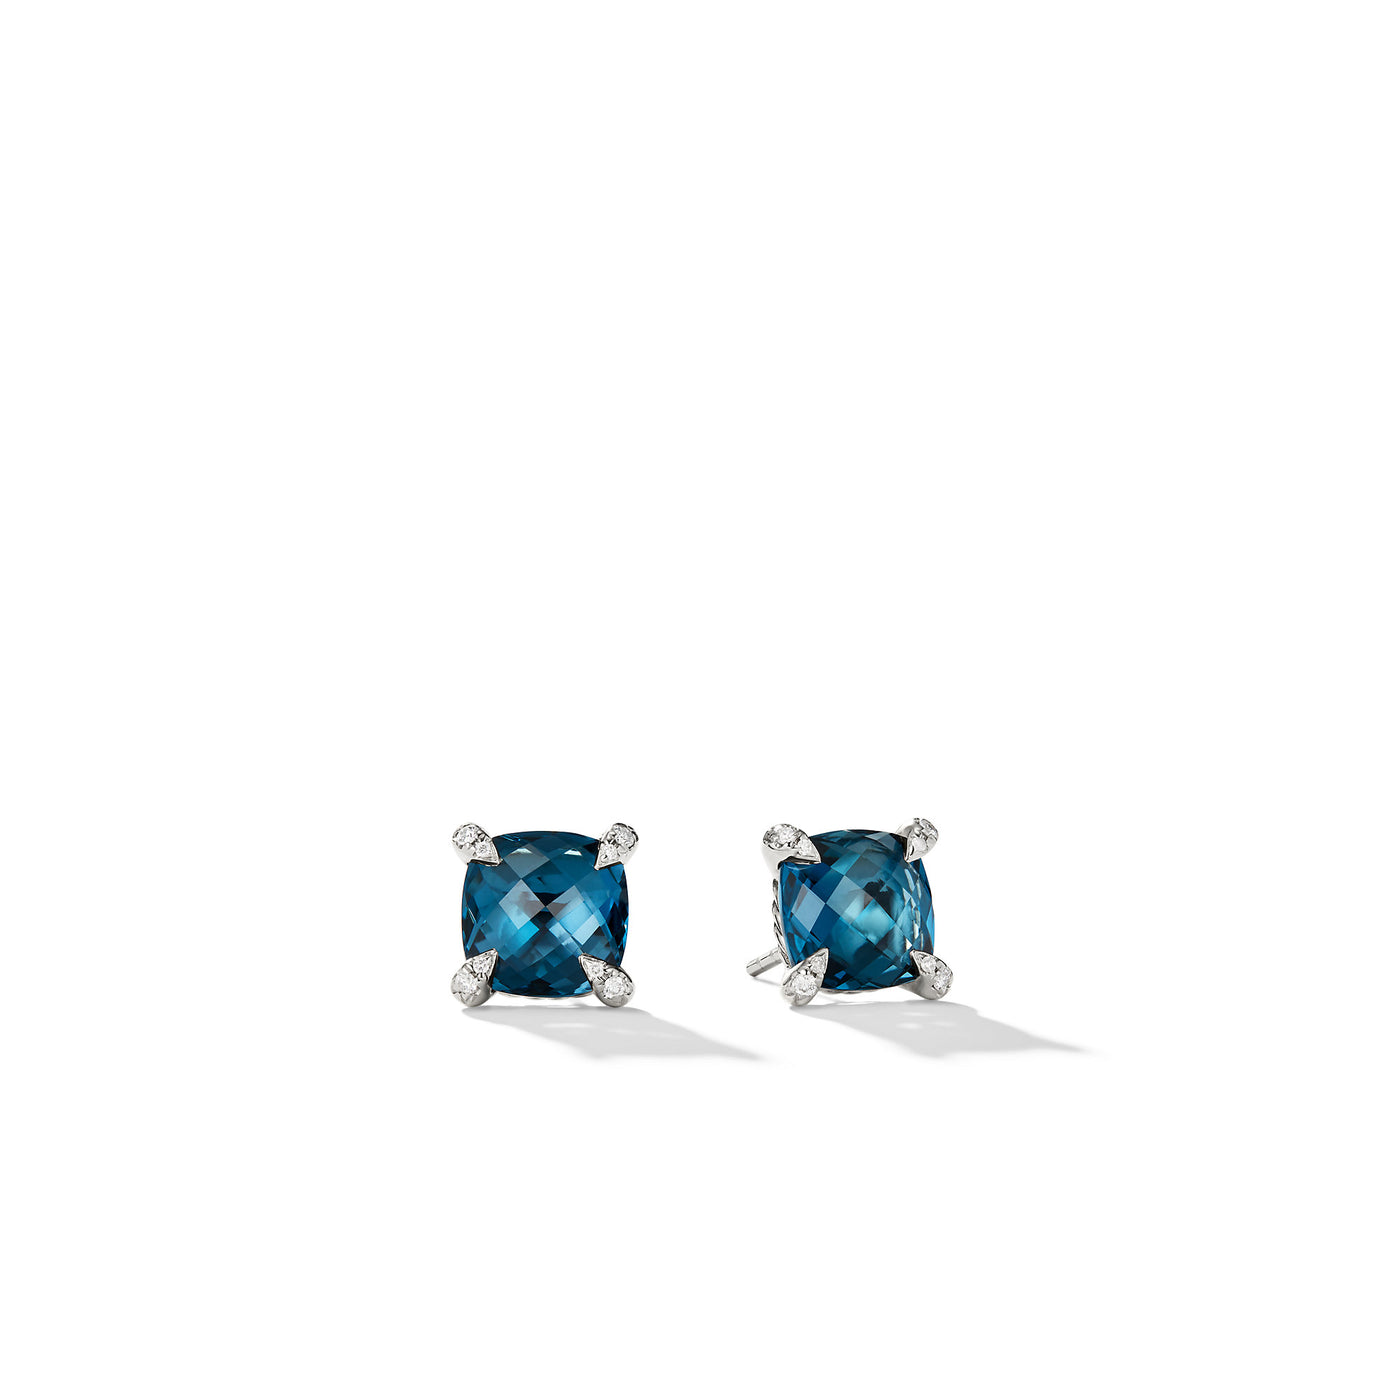 Chatelaine® Stud Earrings in Sterling Silver with Hampton Blue Topaz and Diamonds\, 9mm